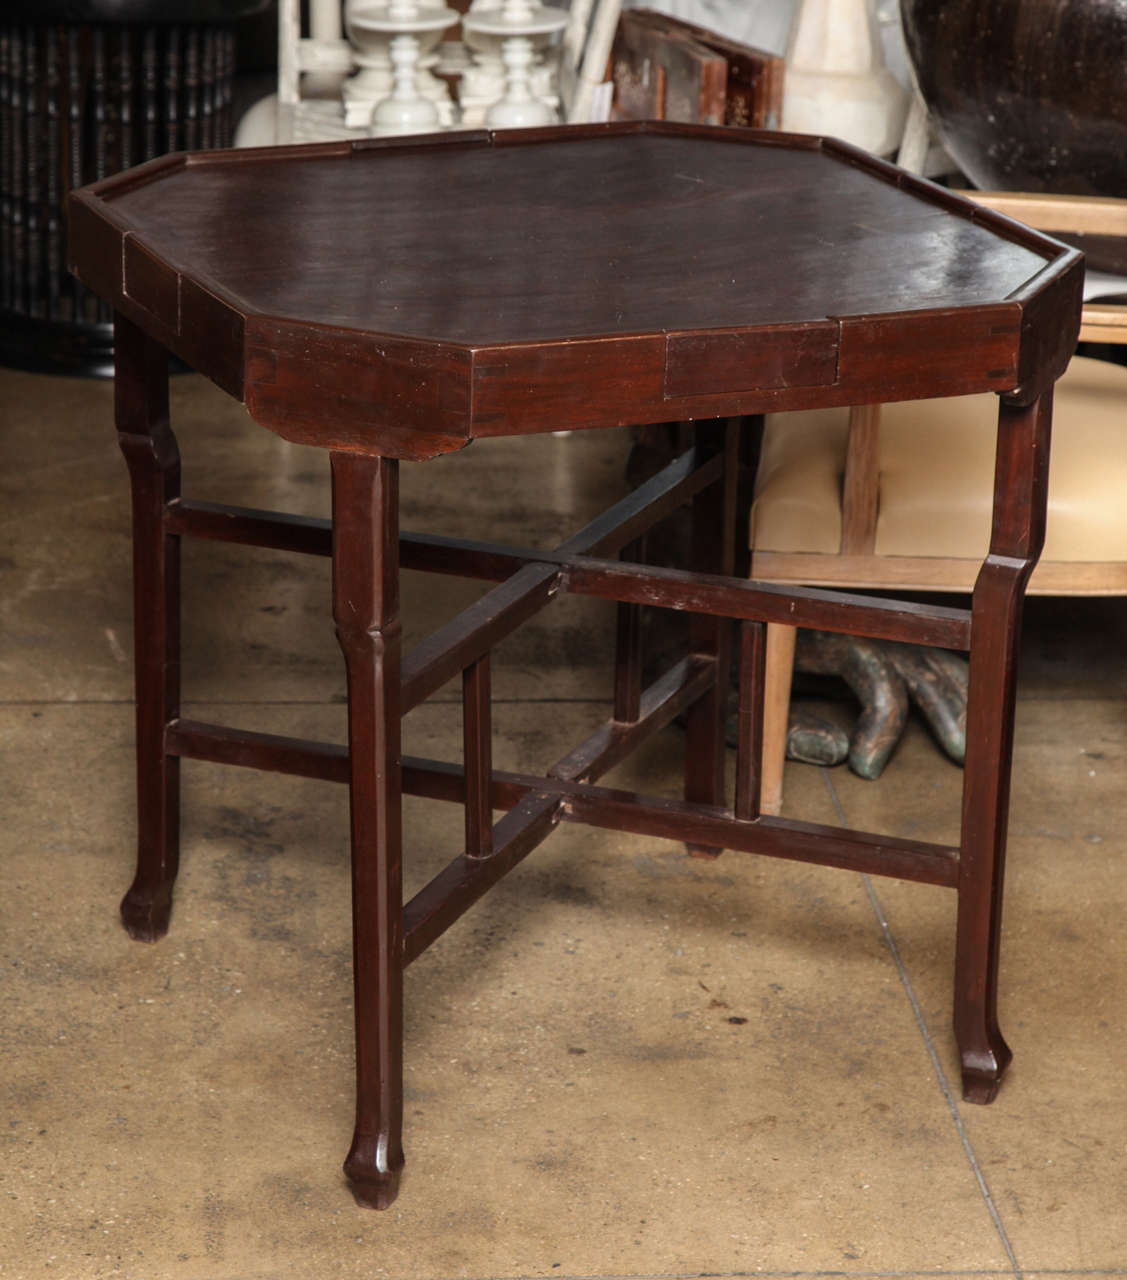 An octagonal card table from Cambodia, with four drawers.